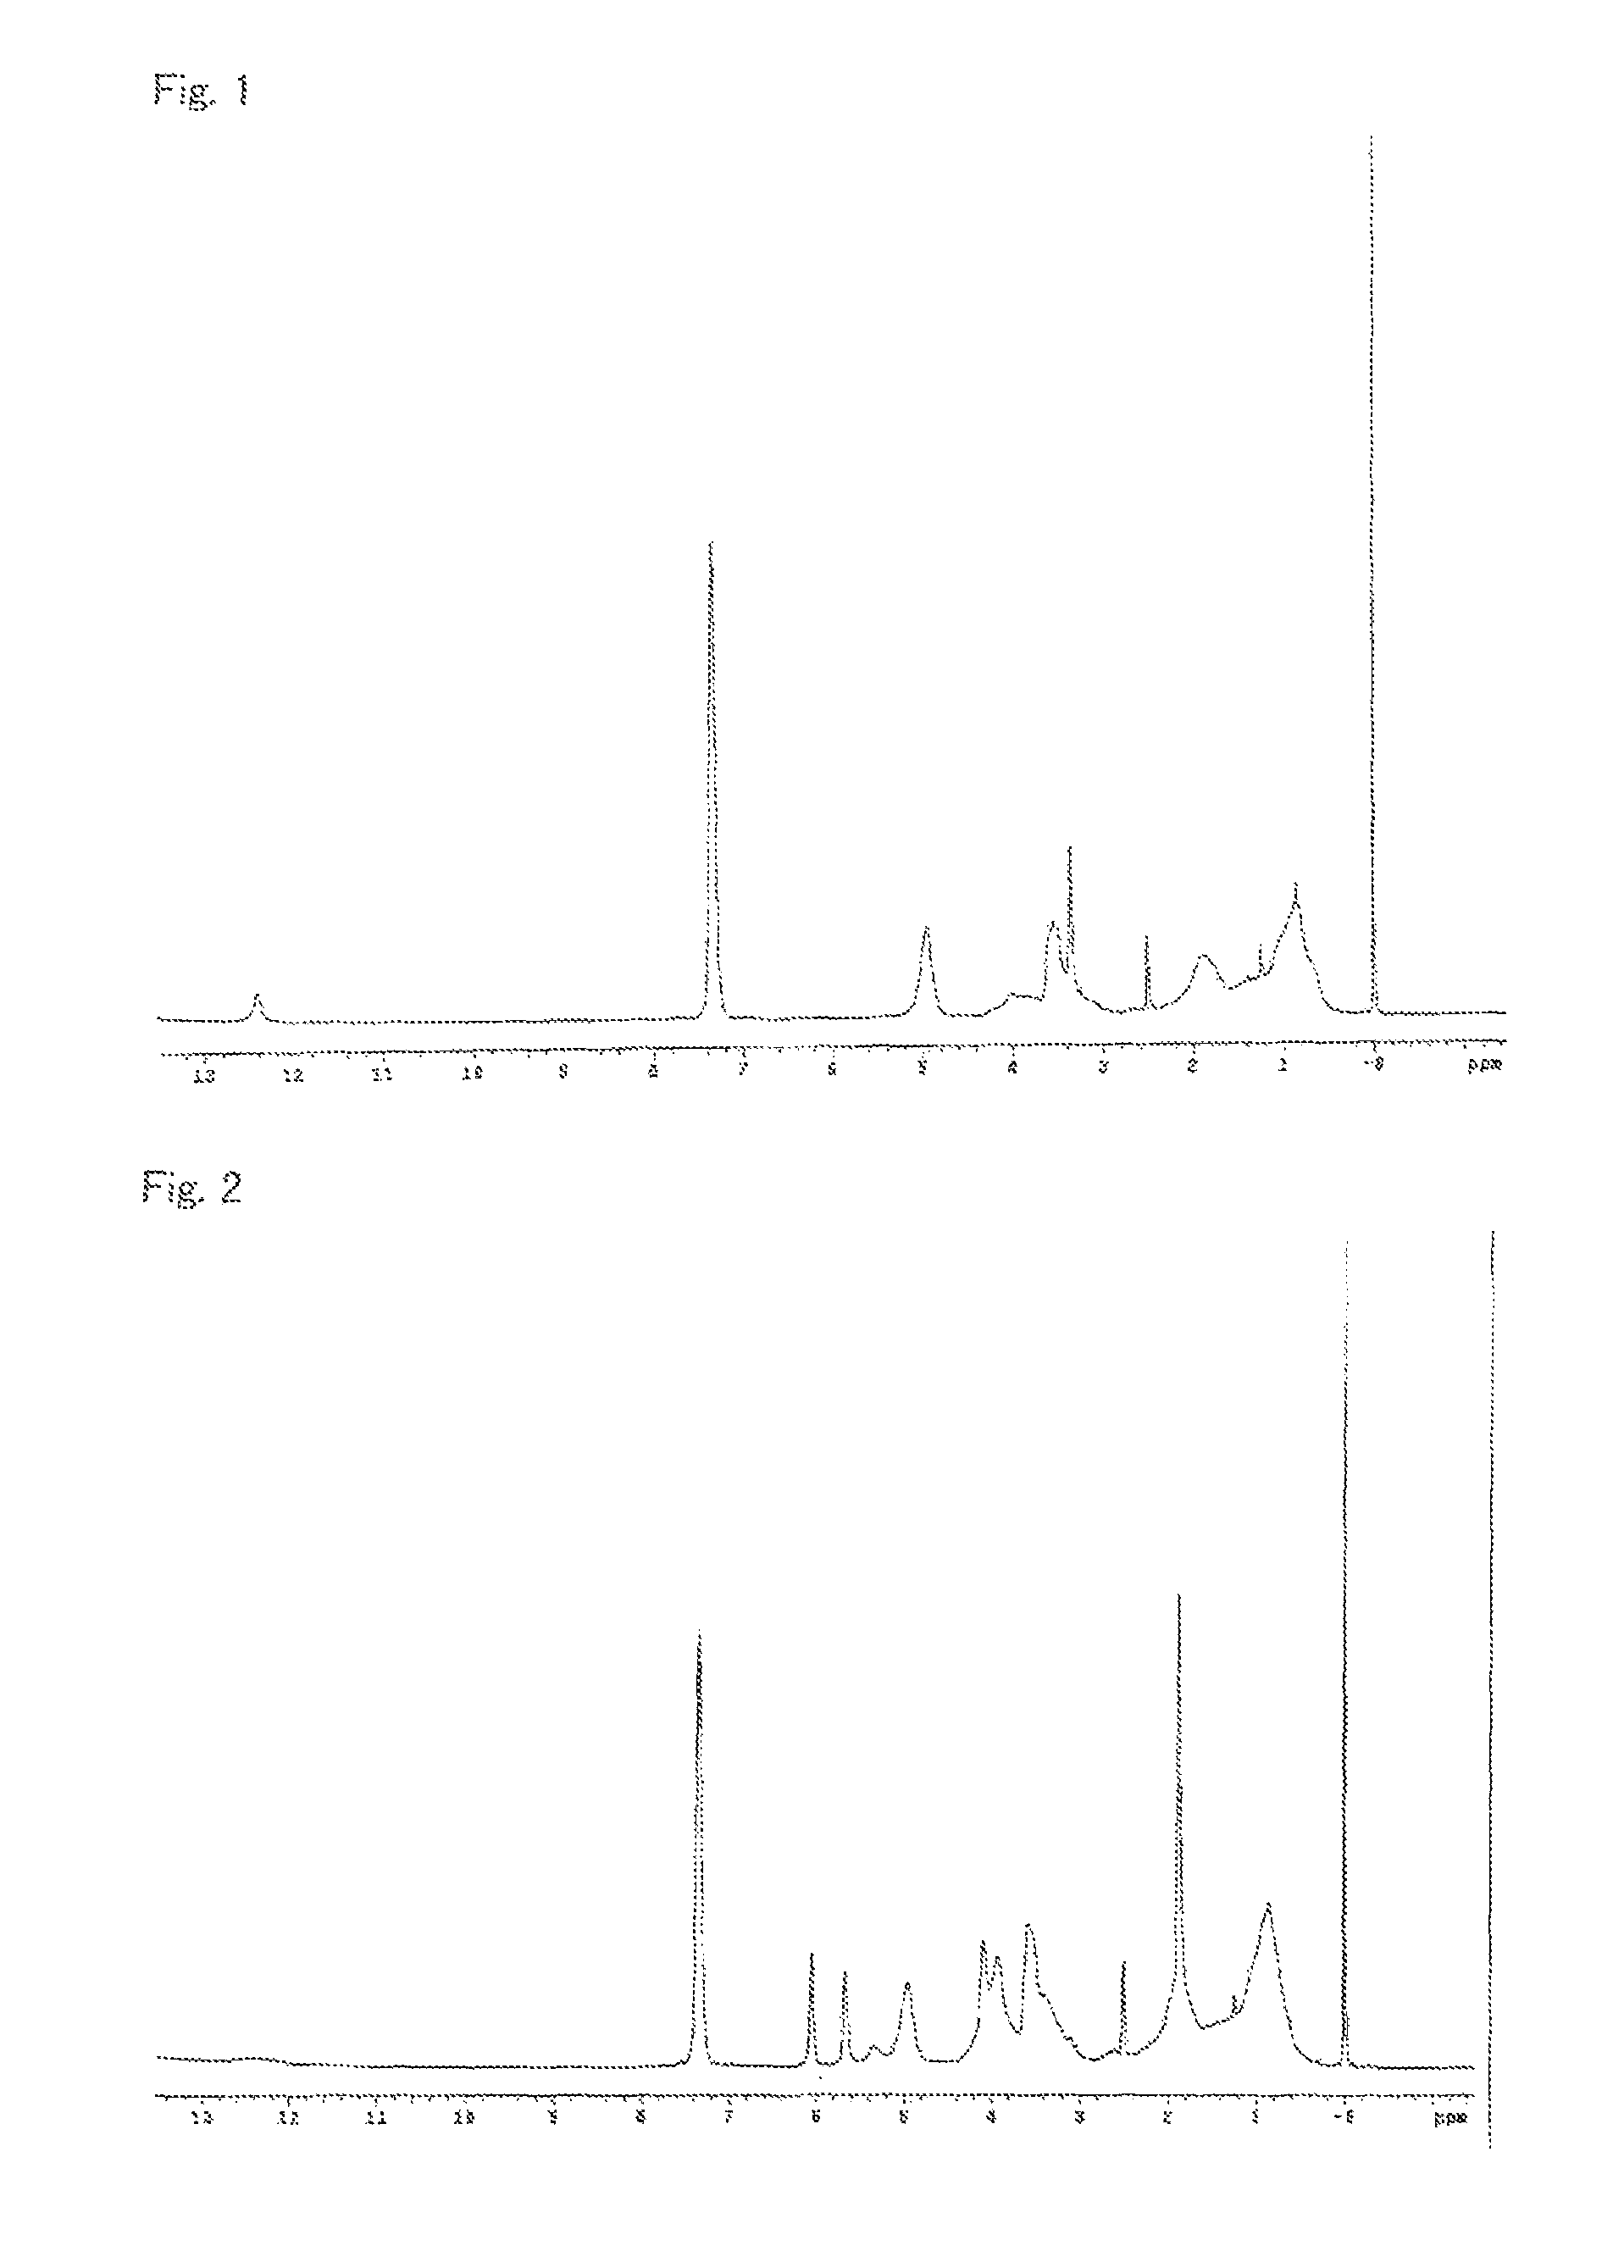 alpha-Allyloxymethylacrylic acid-based copolymer, resin compositions, and use thereof